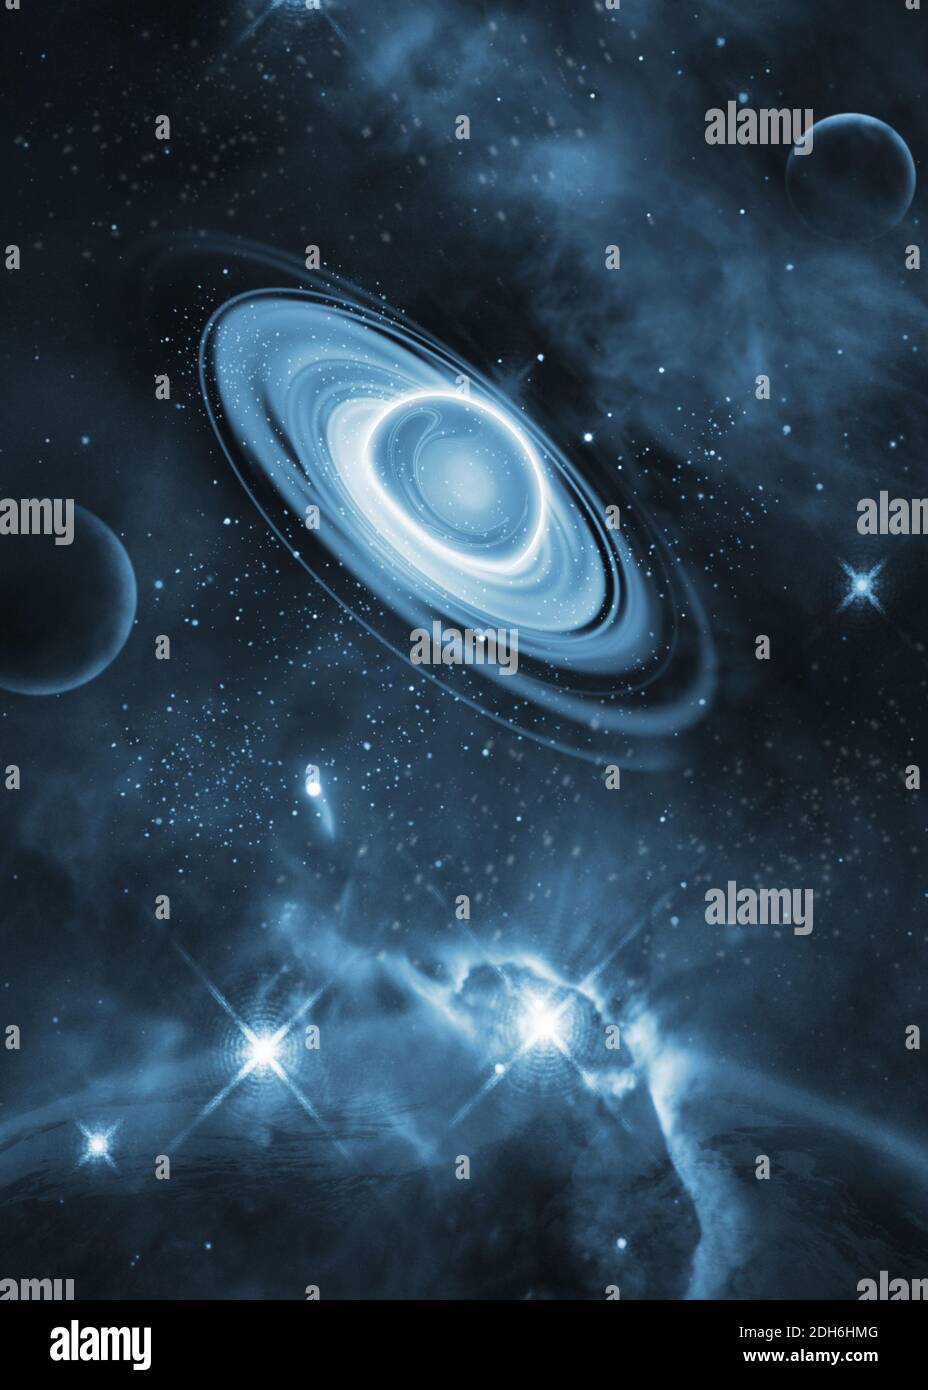 An infinite universe with planets and Galaxies Stock Photo